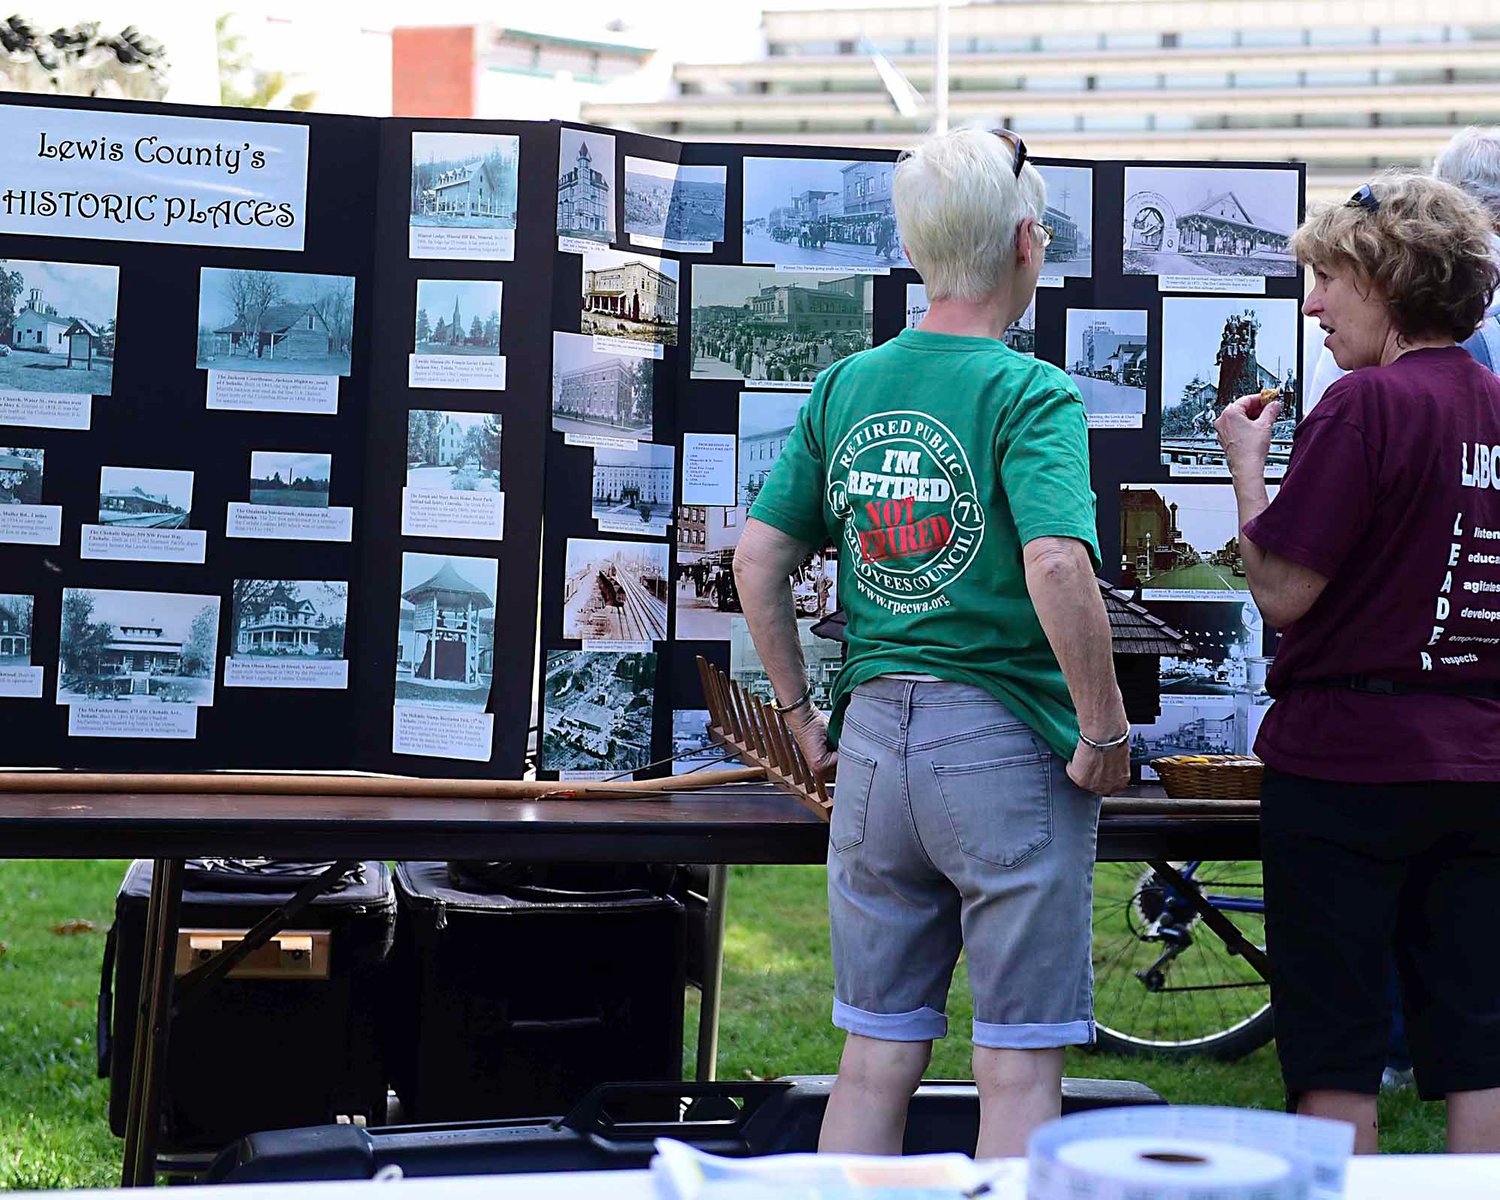 Attendees of the Thurston-Lewis-Mason Labor Council Labor Day Picnic look at a display of historic locations in Lewis County. The picnic included food, activities for children, music, historical displays and information about Centralia founder George Washington.